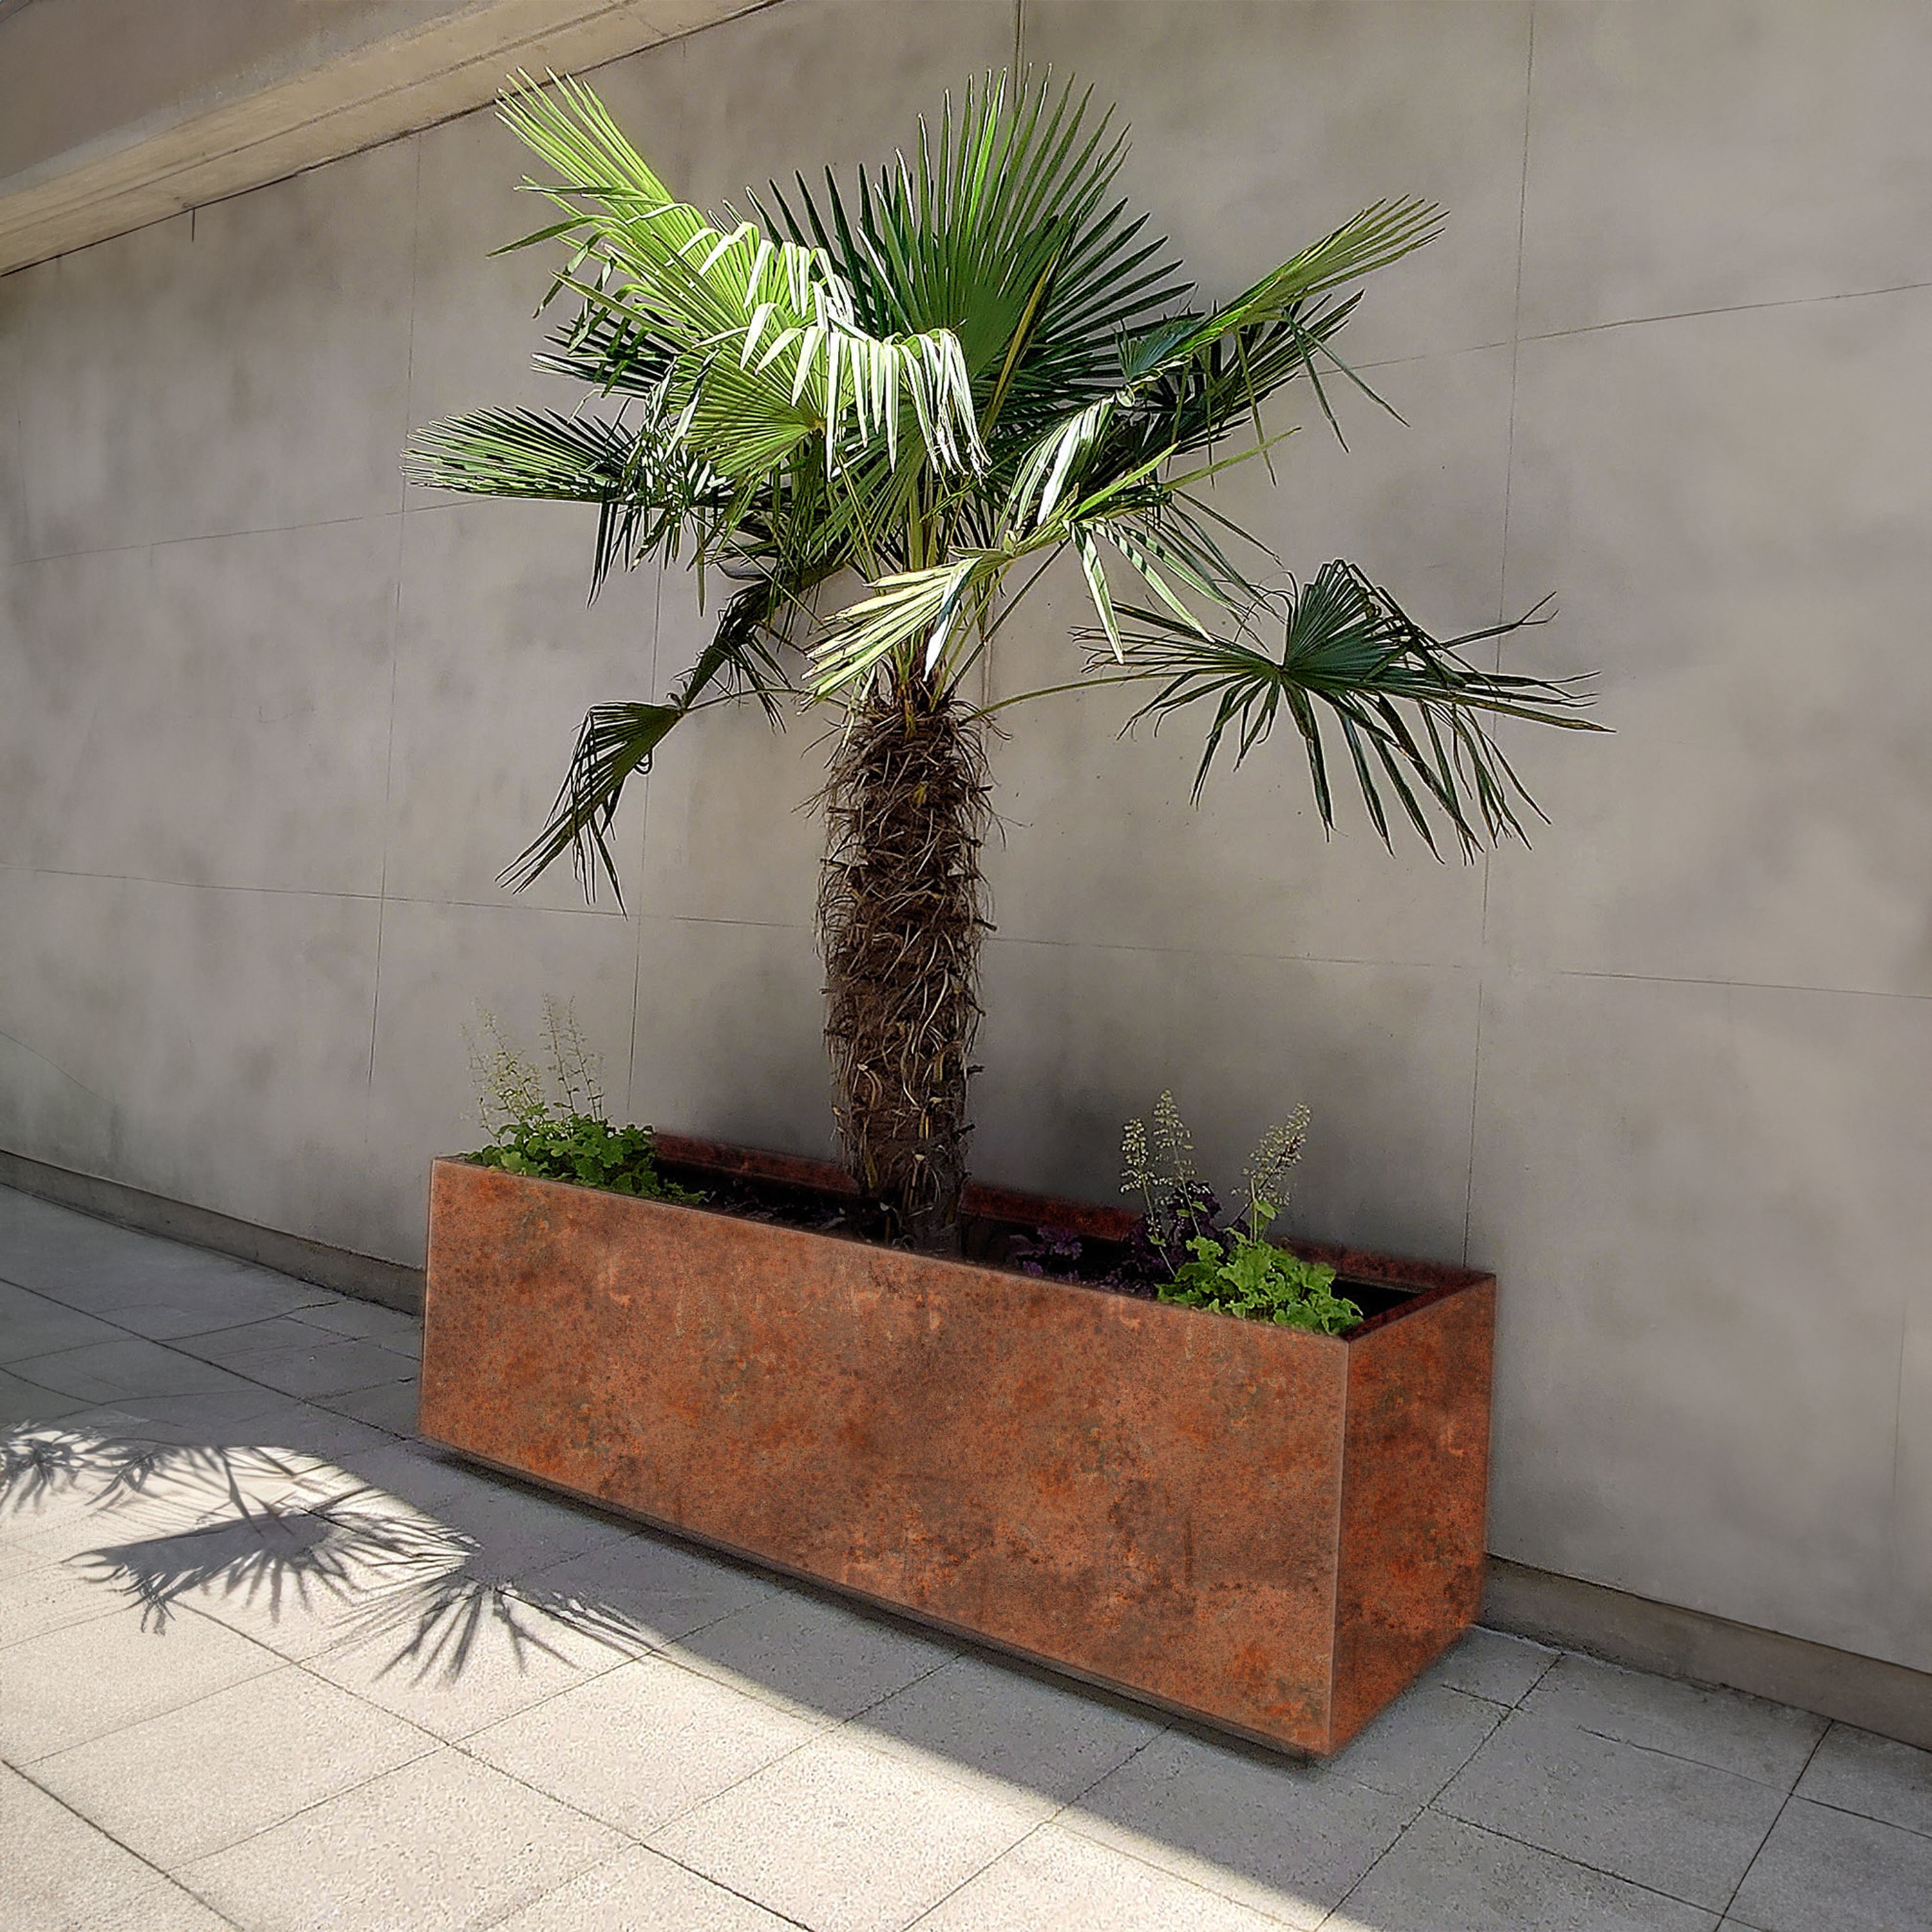 bellamy-commercial-grade-rustic-steel-planter-troughs-3-sizes-available